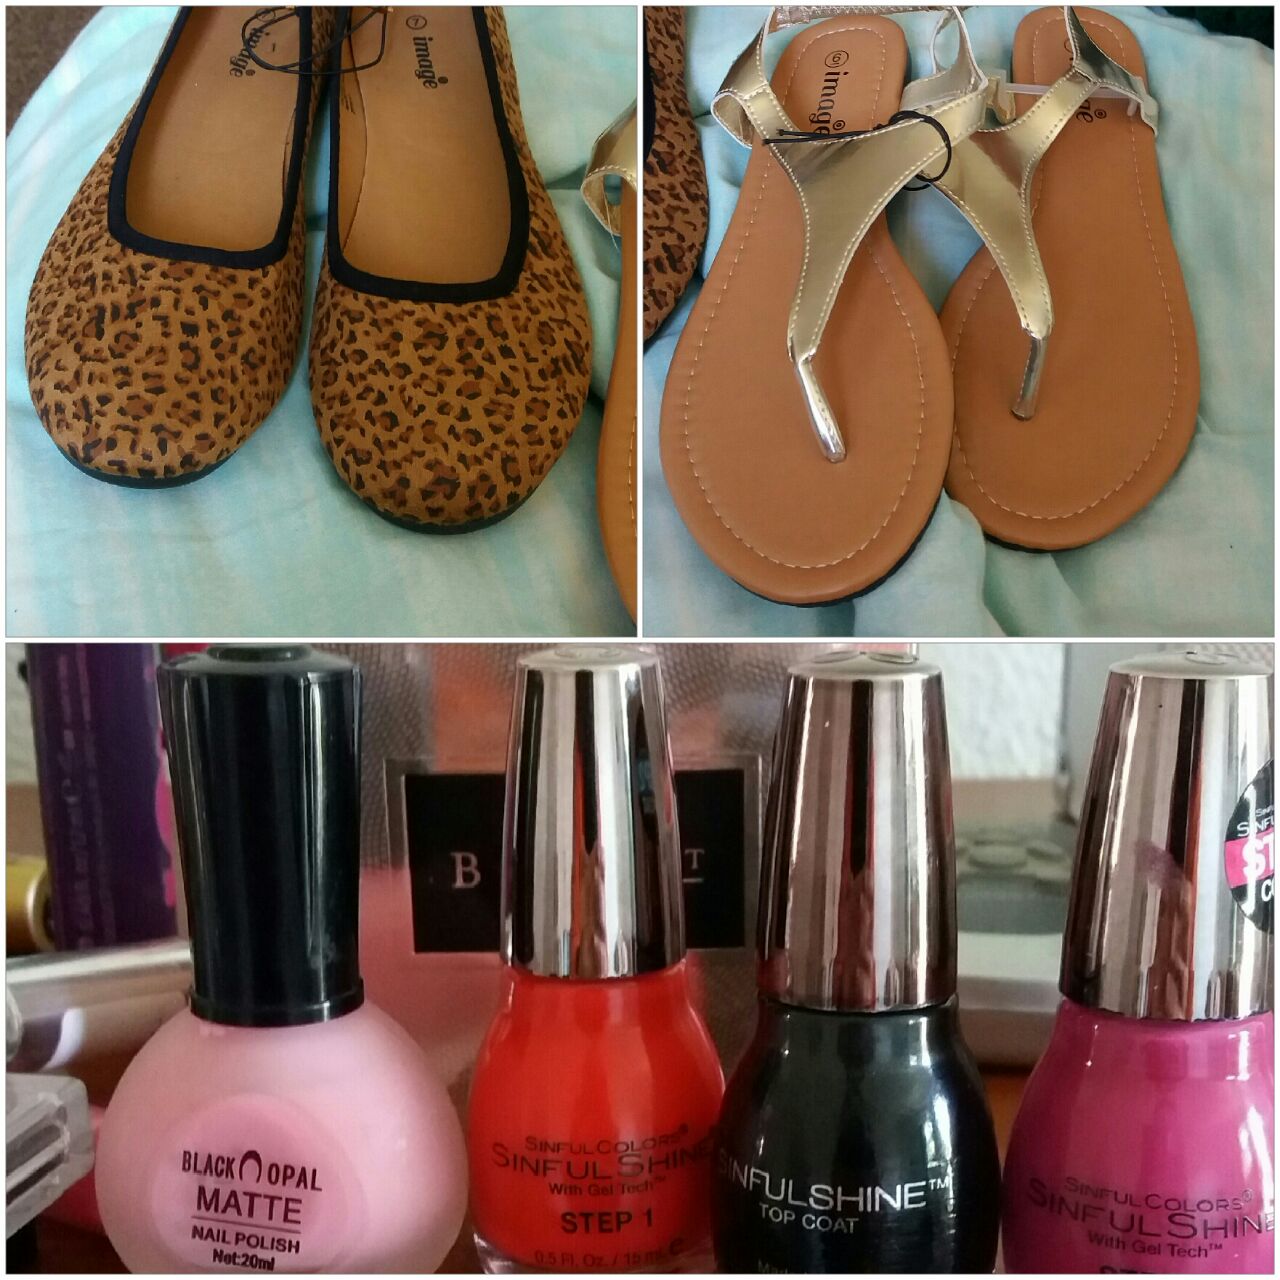 Shoes and nail colour from my retail therapy